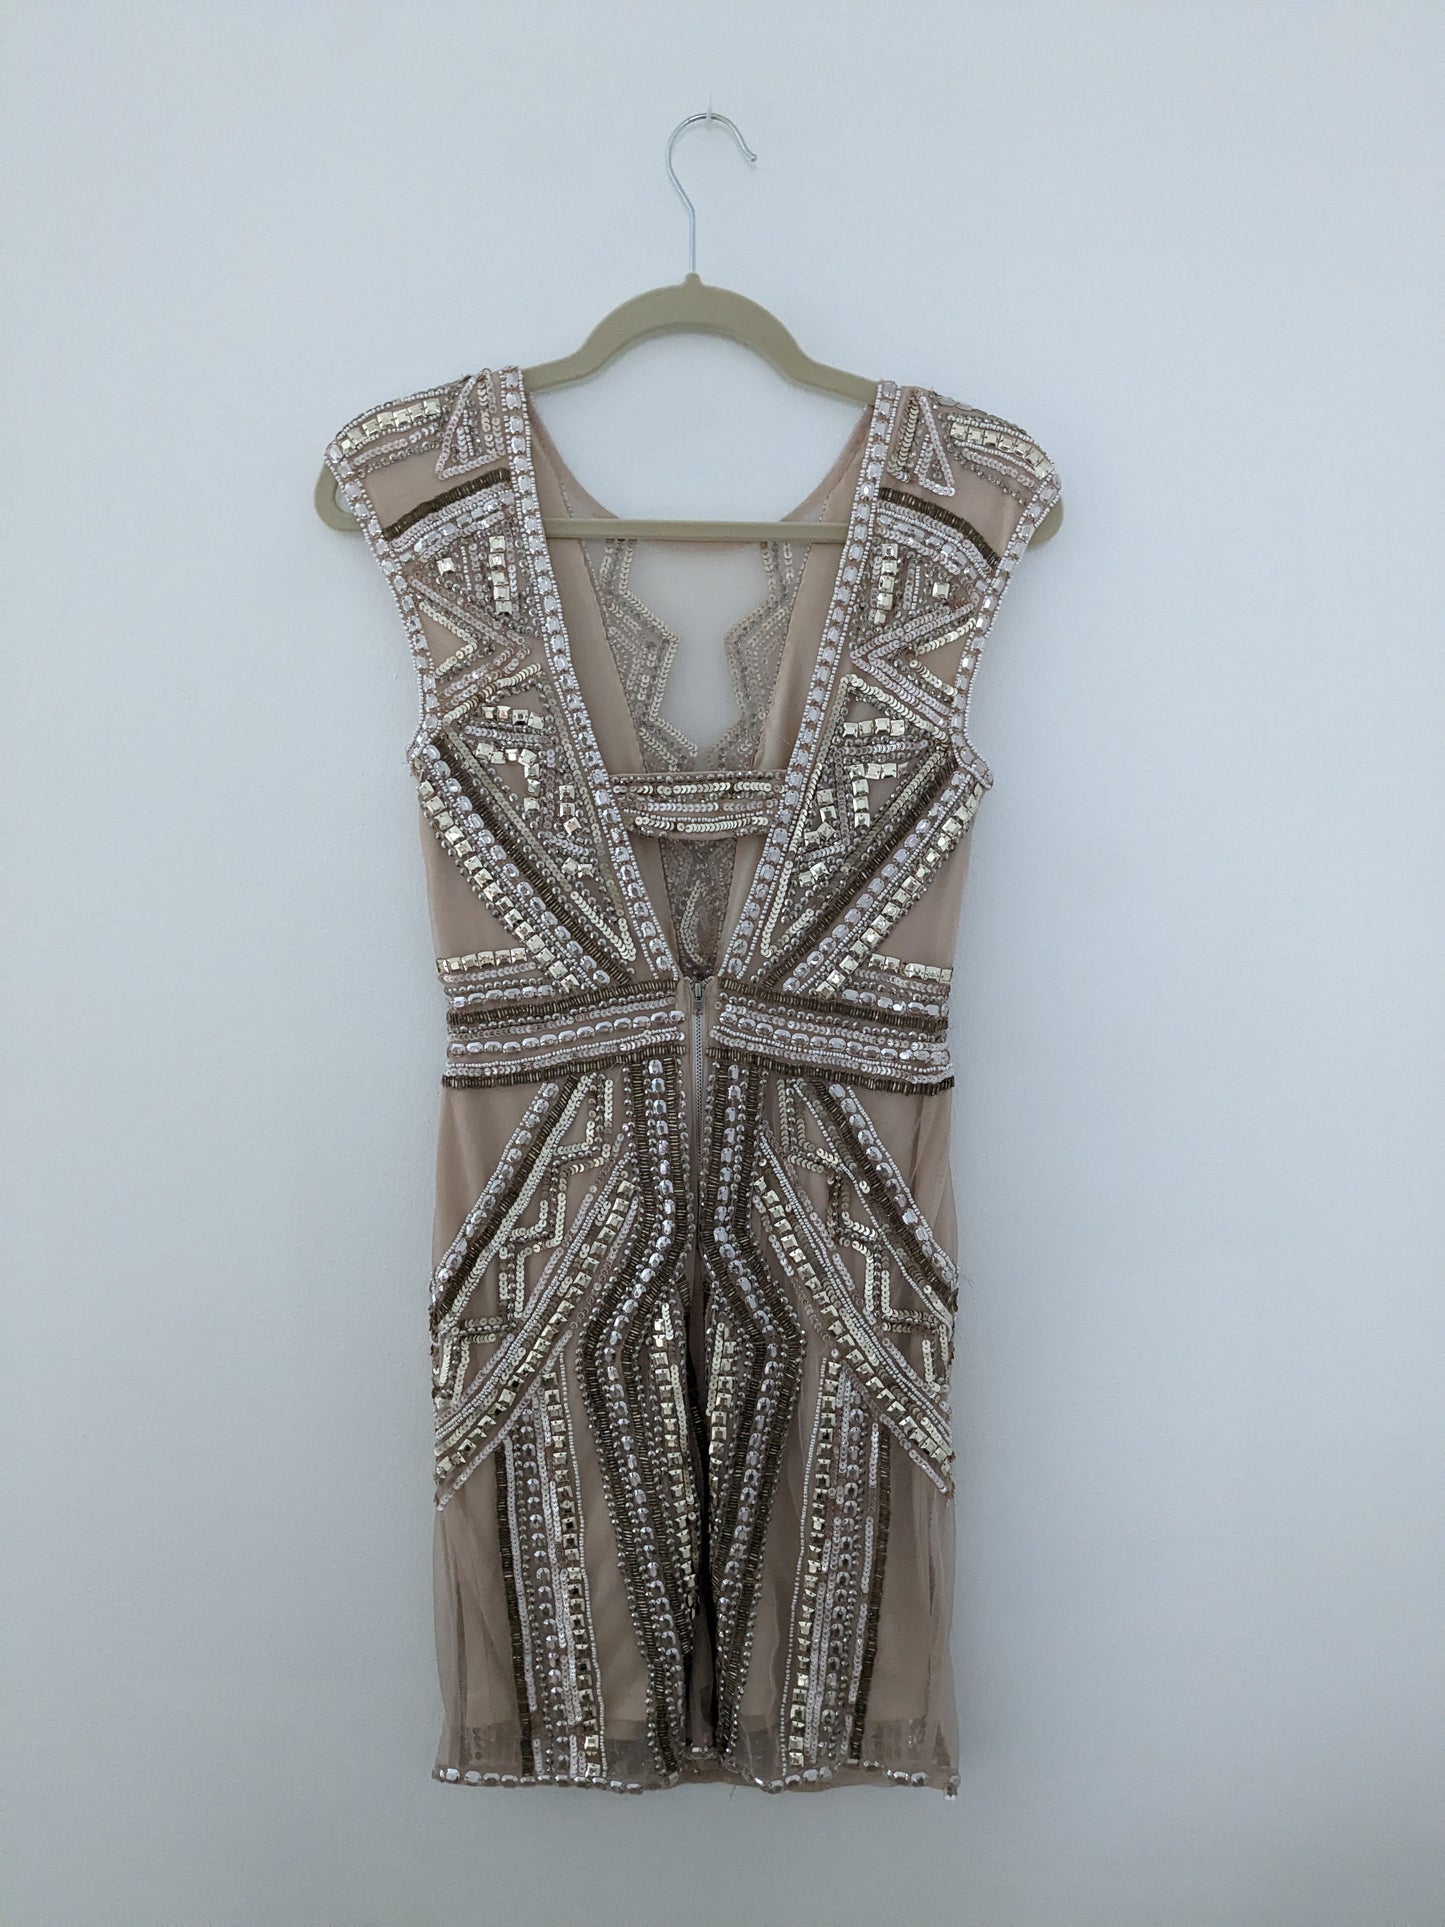 NWT 20s style beaded dress | Size 6